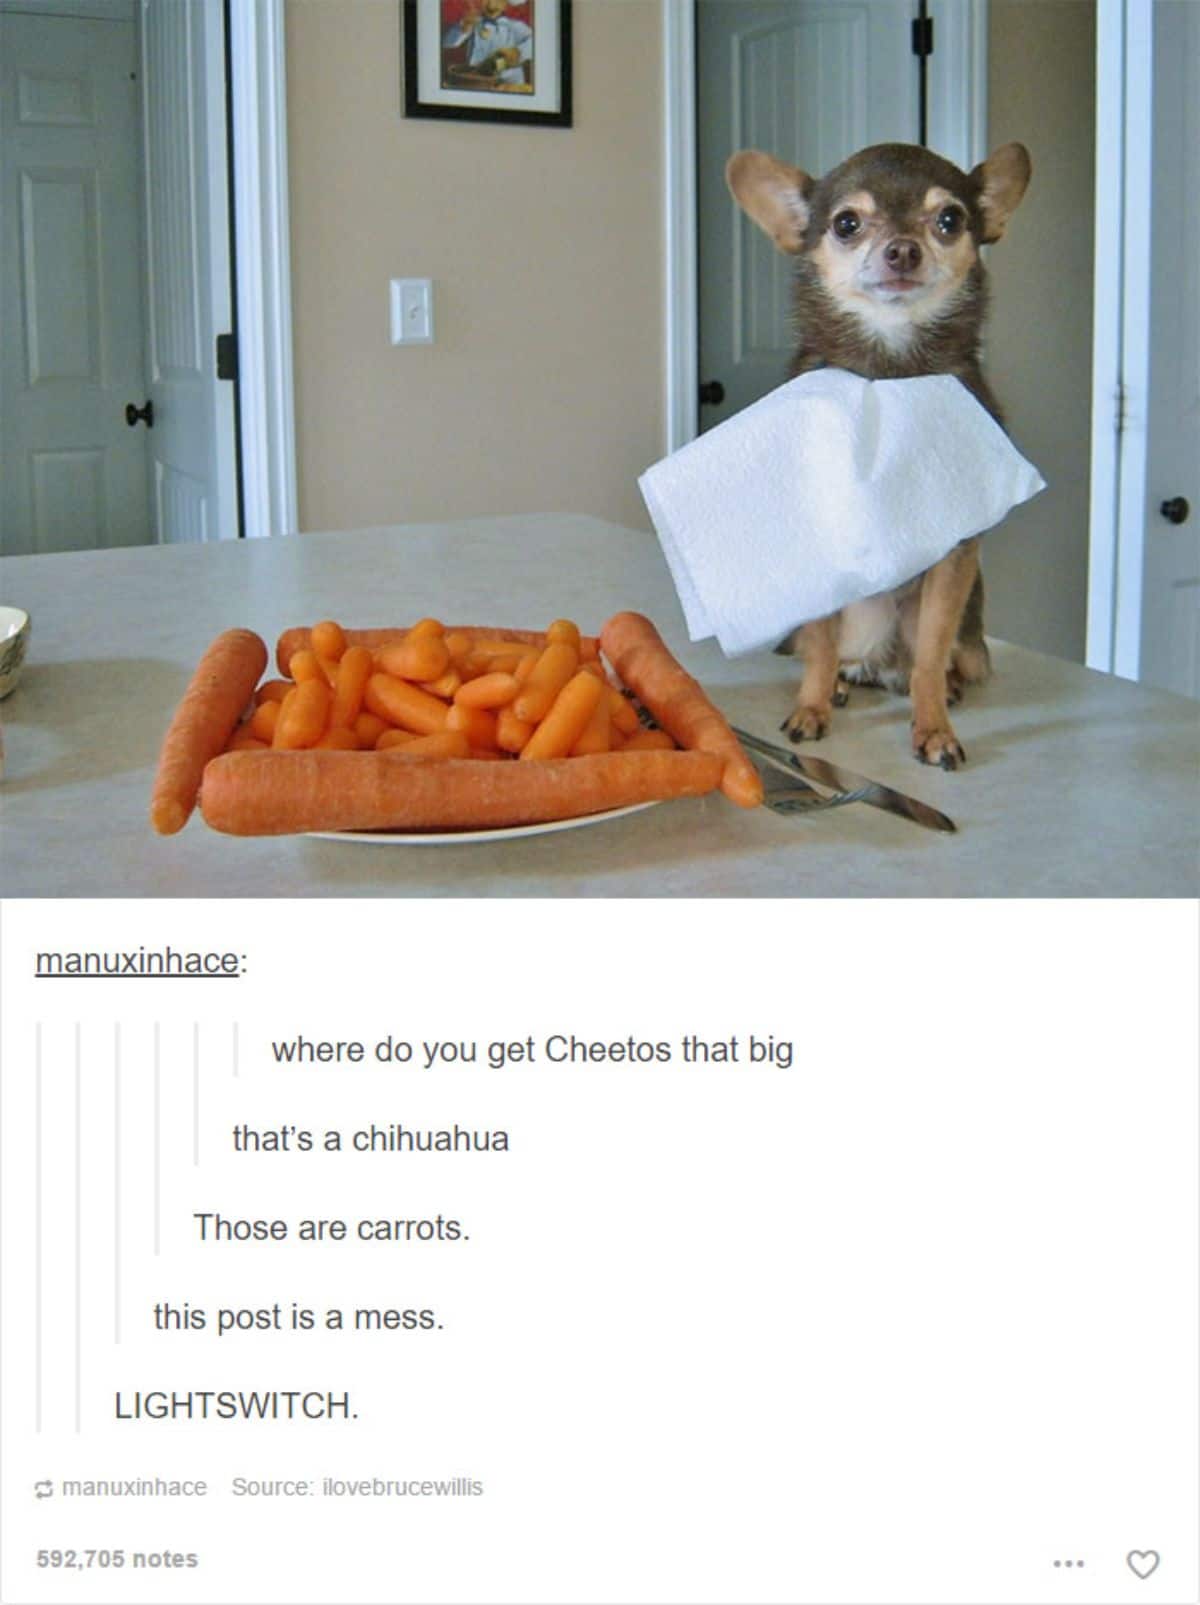 brown and white chihuahua with a tissue attached to the collar sitting on a table next to a plate full of carrots and a silver fork and knife